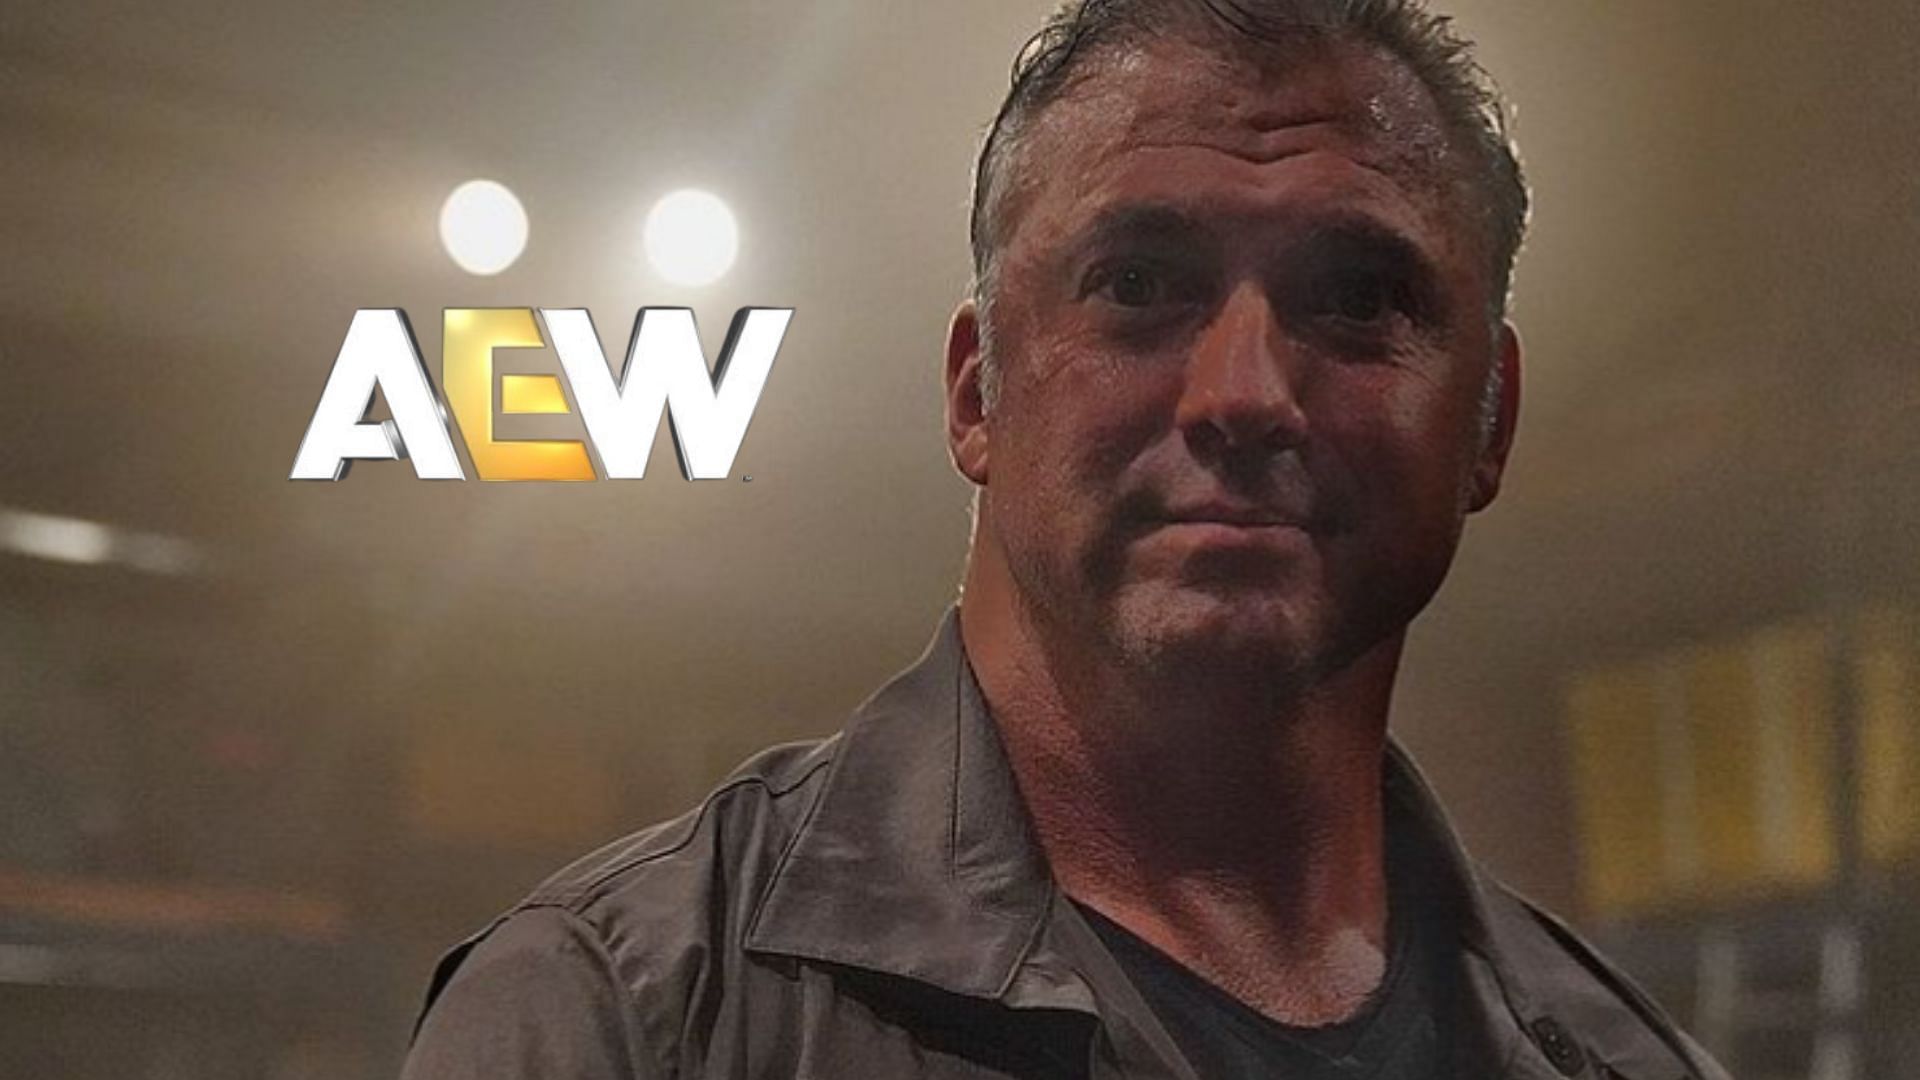 Shane McMahon is a former WWE superstar and executive [Image Credits: McMahon